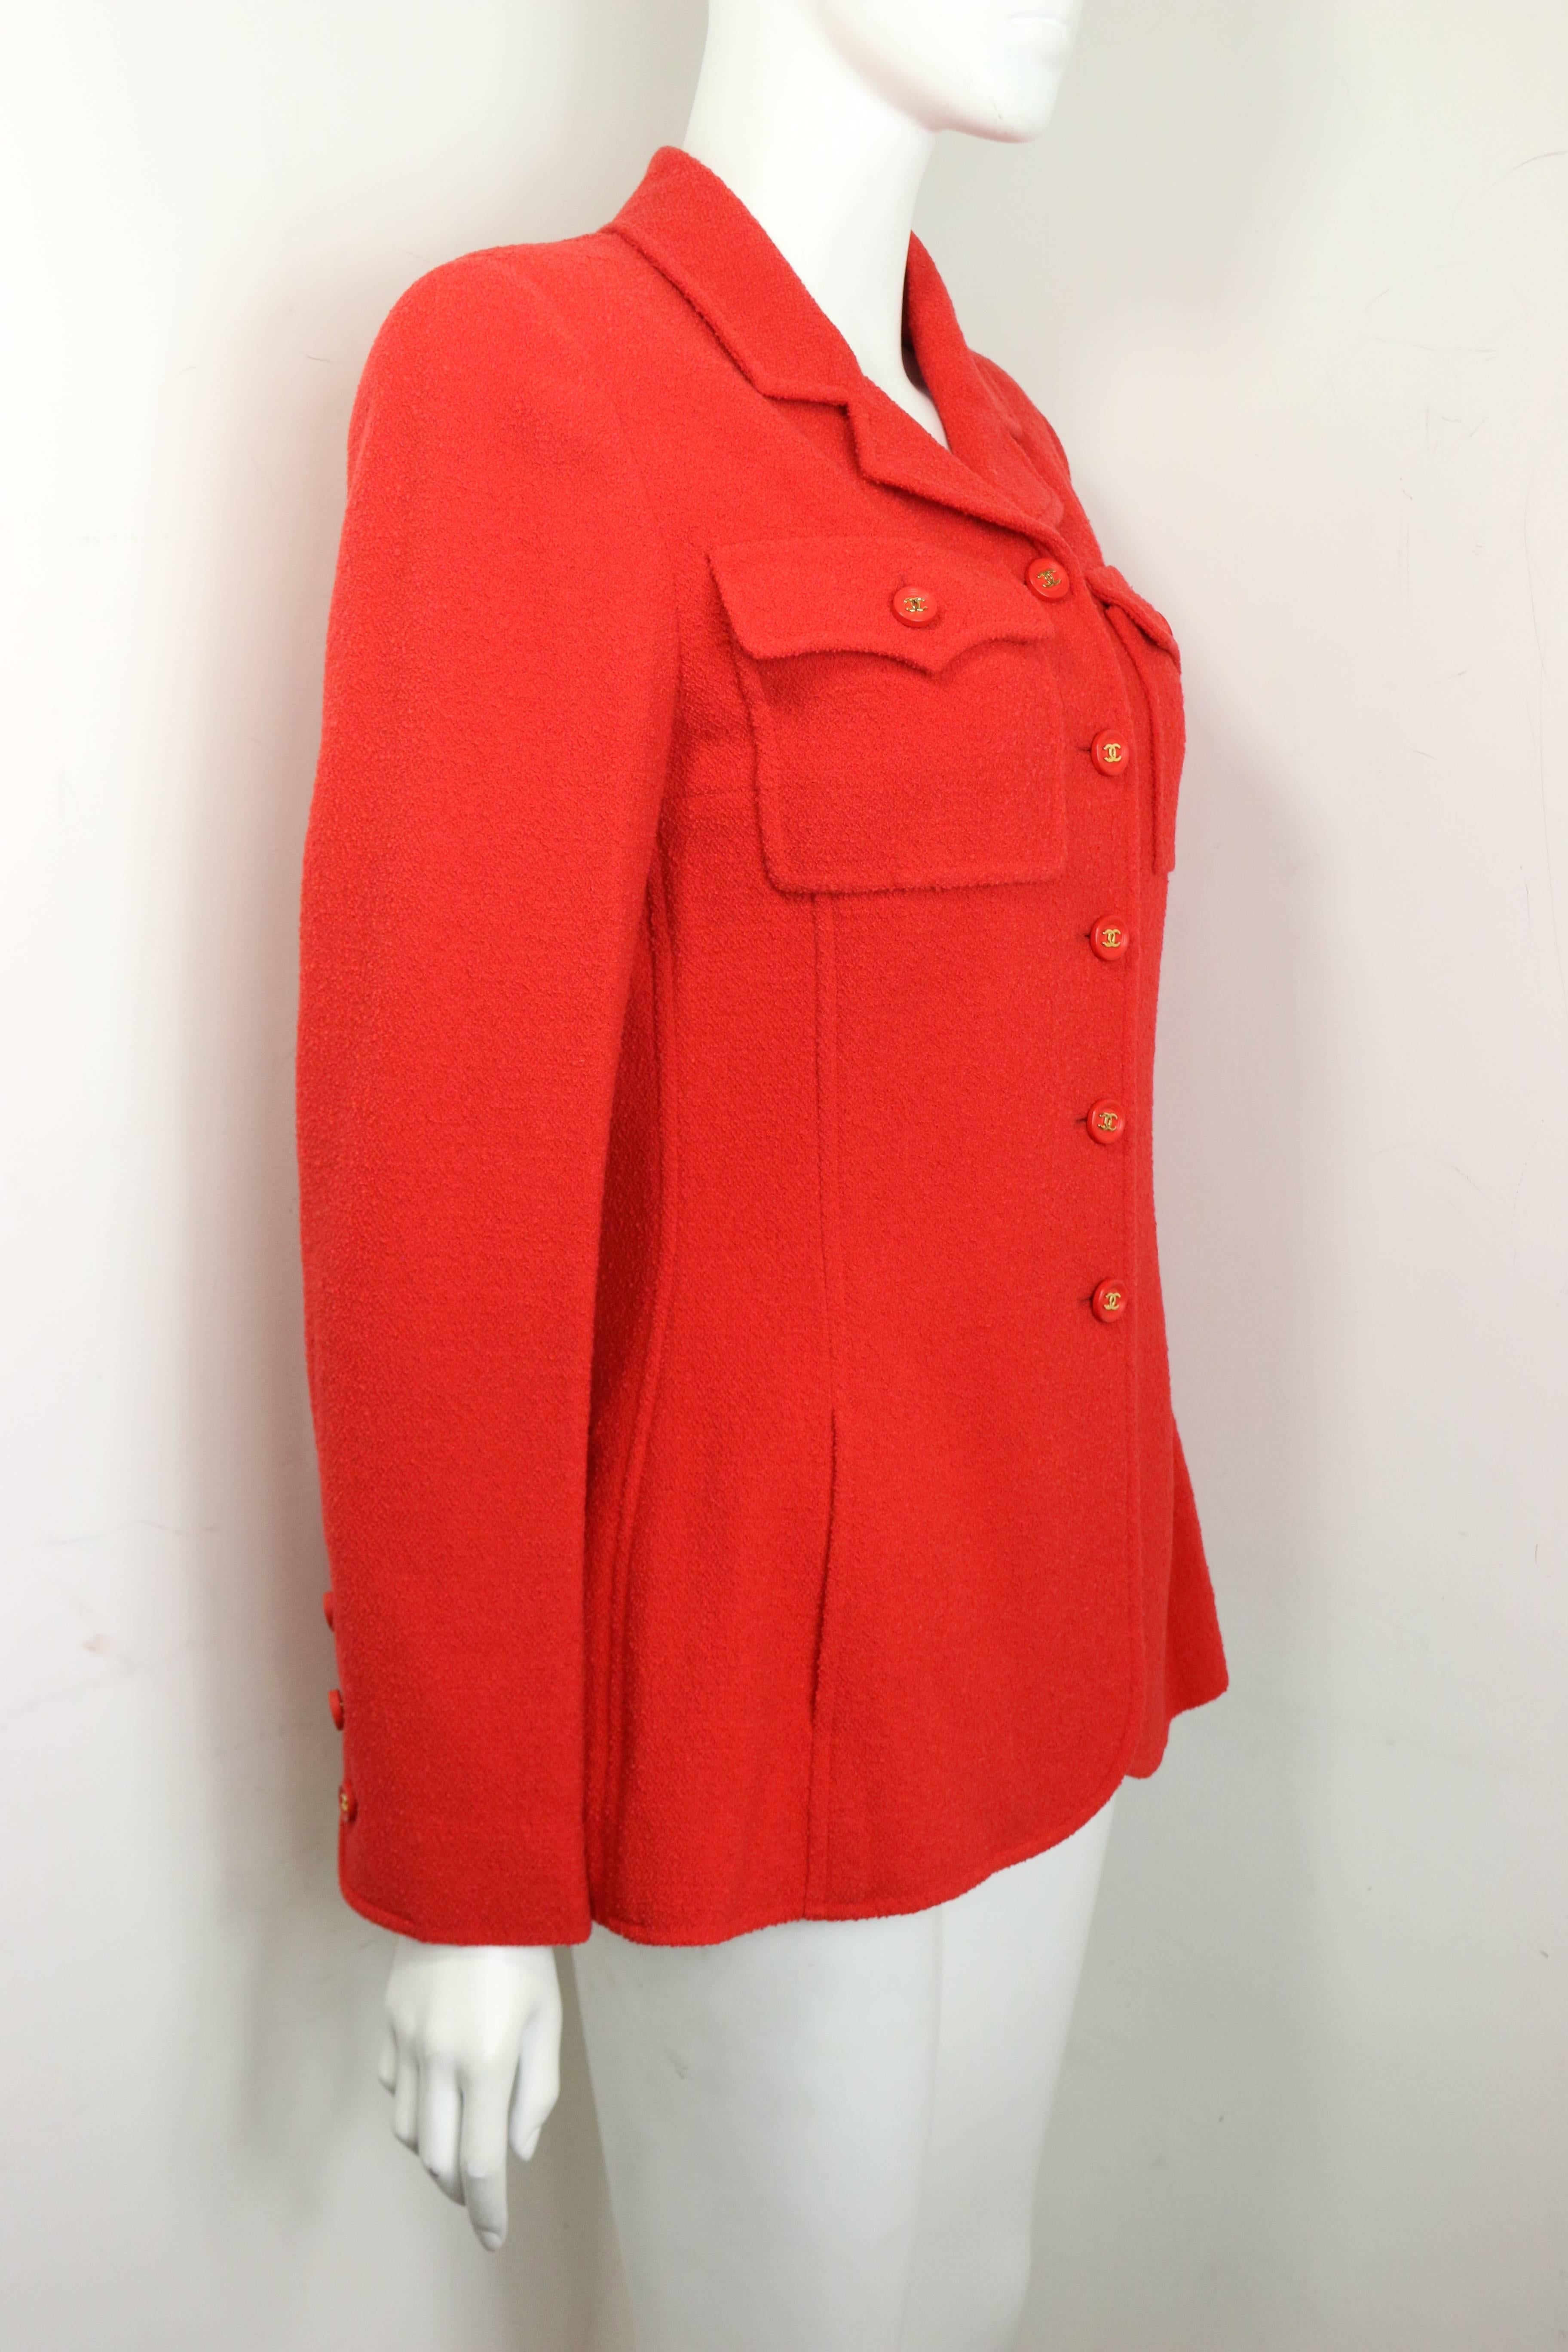 Women's or Men's Chanel Red Wool Jacket  For Sale